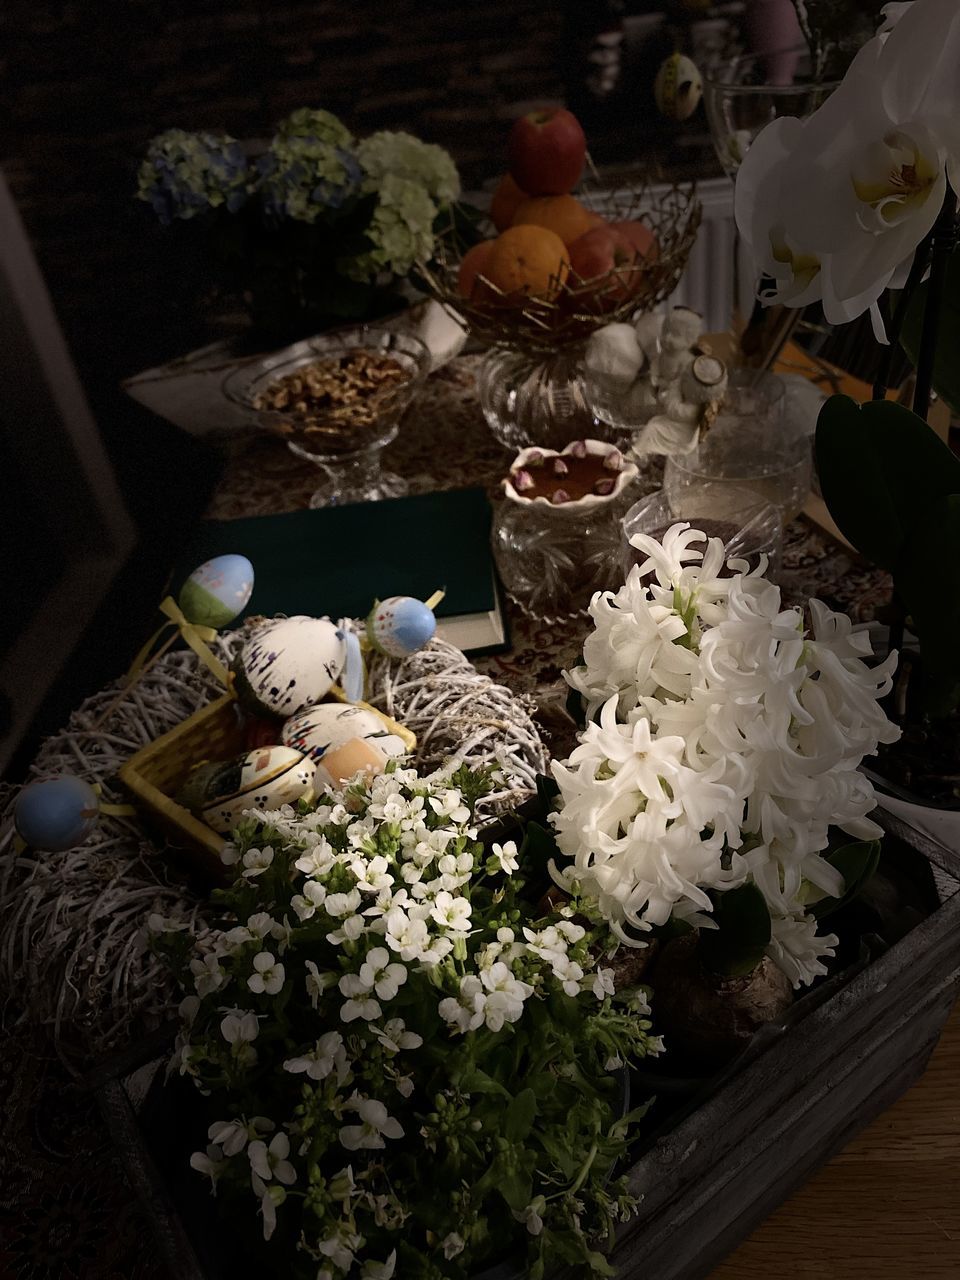 plant, flower, floristry, flowering plant, freshness, floral design, food and drink, food, high angle view, no people, nature, table, indoors, healthy eating, wellbeing, centrepiece, container, arrangement, flower arrangement, vegetable, bouquet, still life, basket, candle, beauty in nature